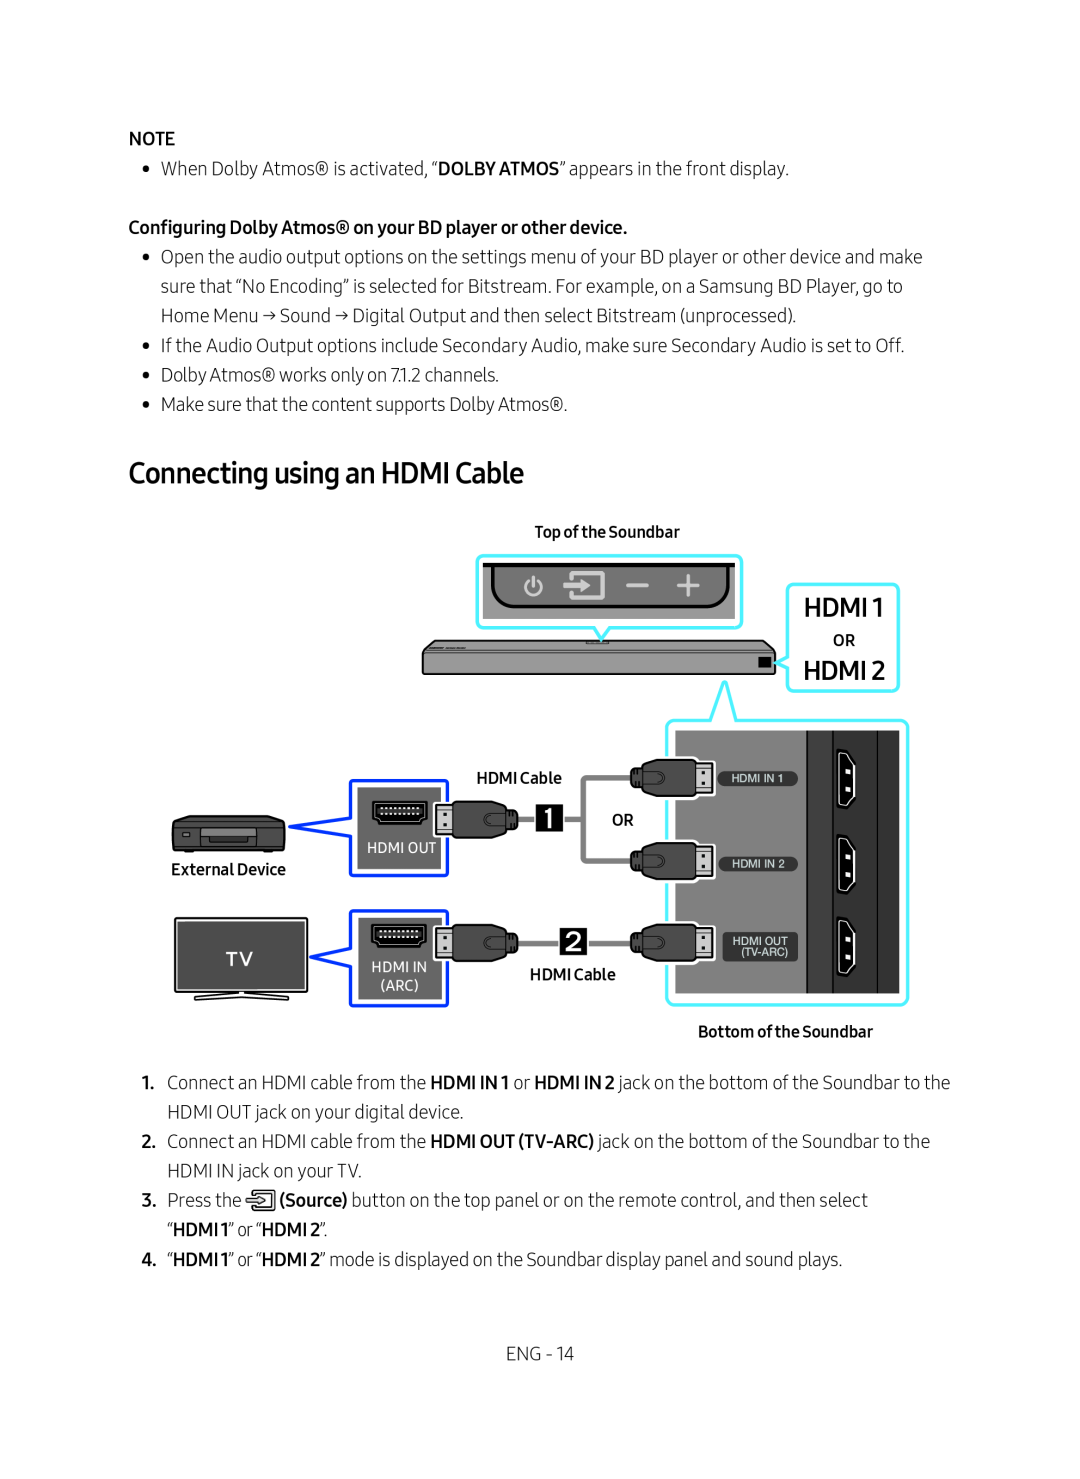 Connecting using an HDMI Cable Dolby Atmos HW-N850